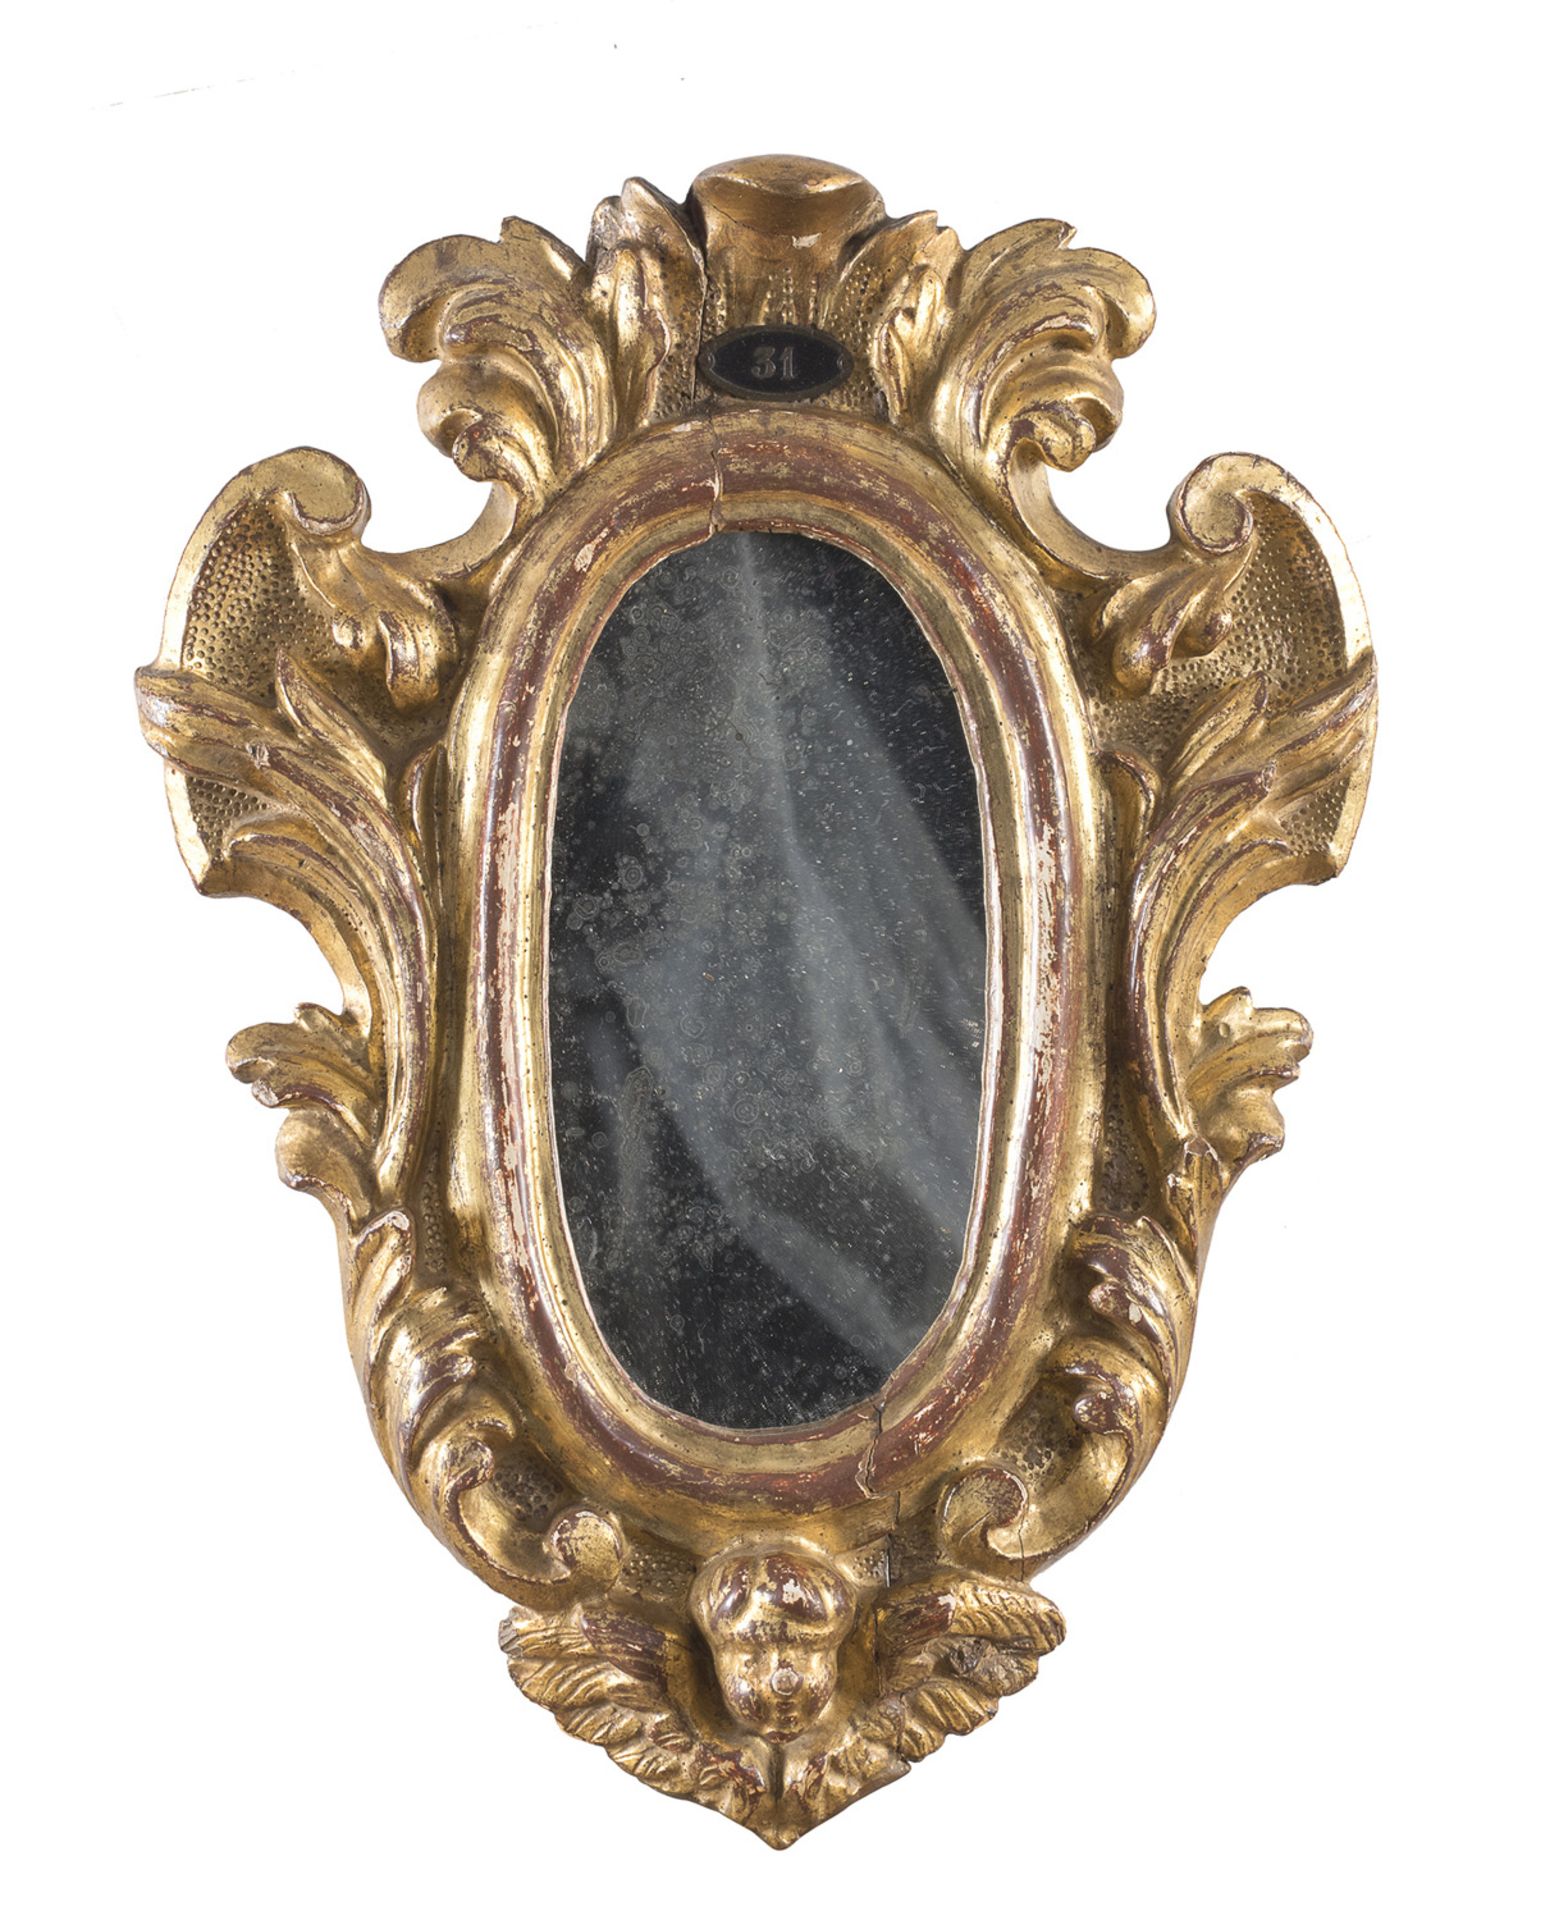 SMALL GILTWOOD MIRROR NORTHERN ITALY 18TH CENTURY